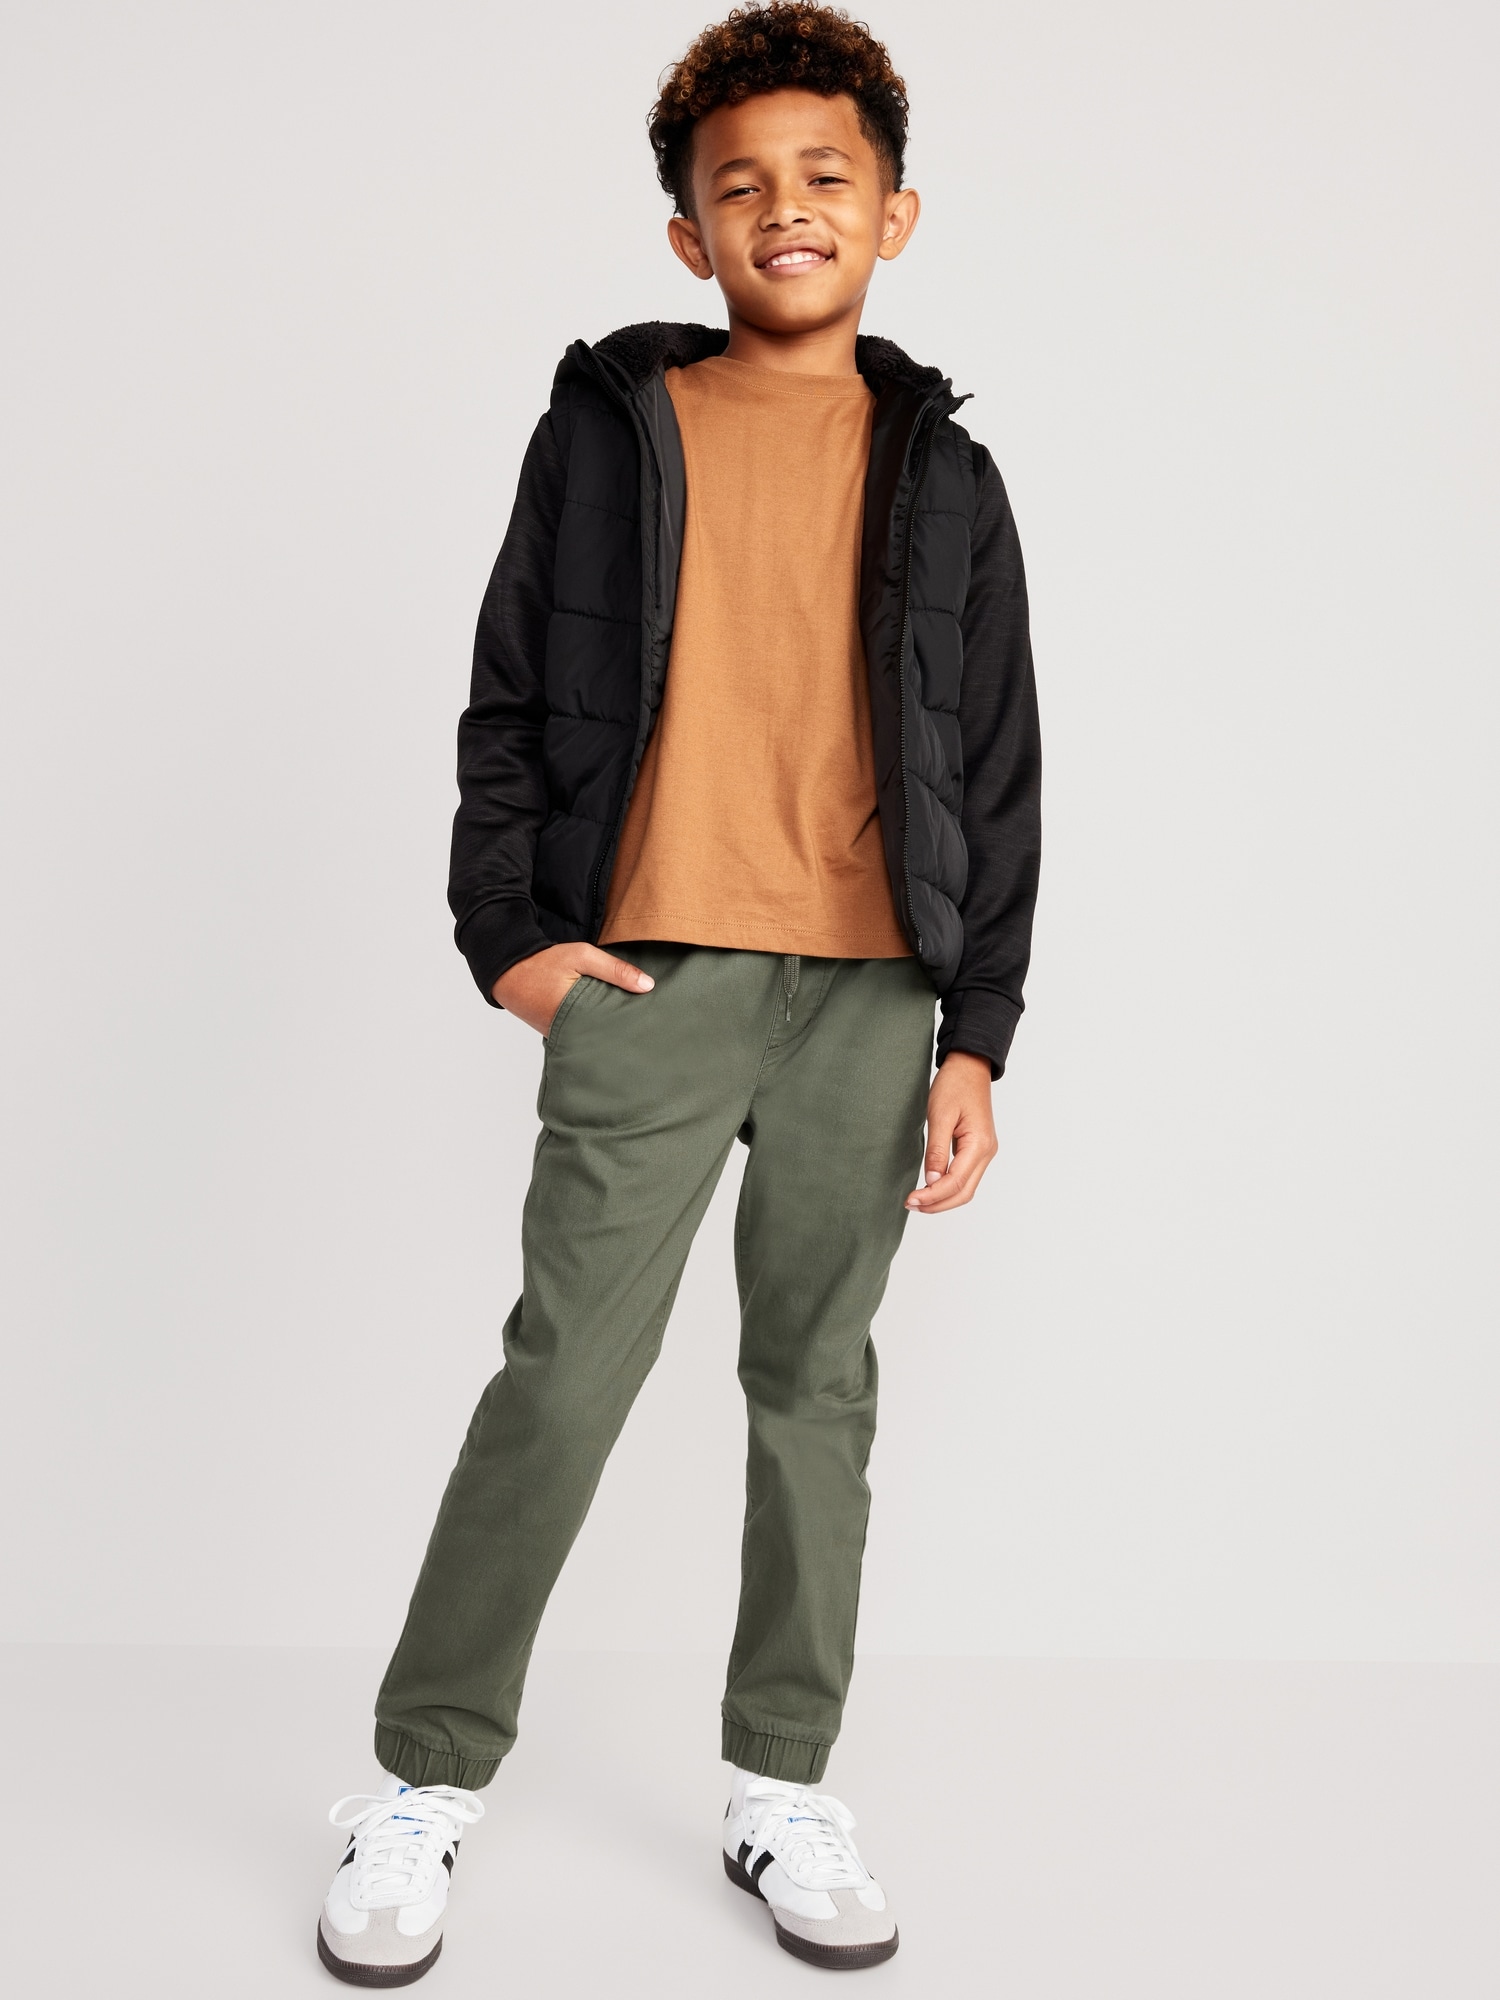 Built-In Flex Twill Jogger Pants for Boys, Old Navy